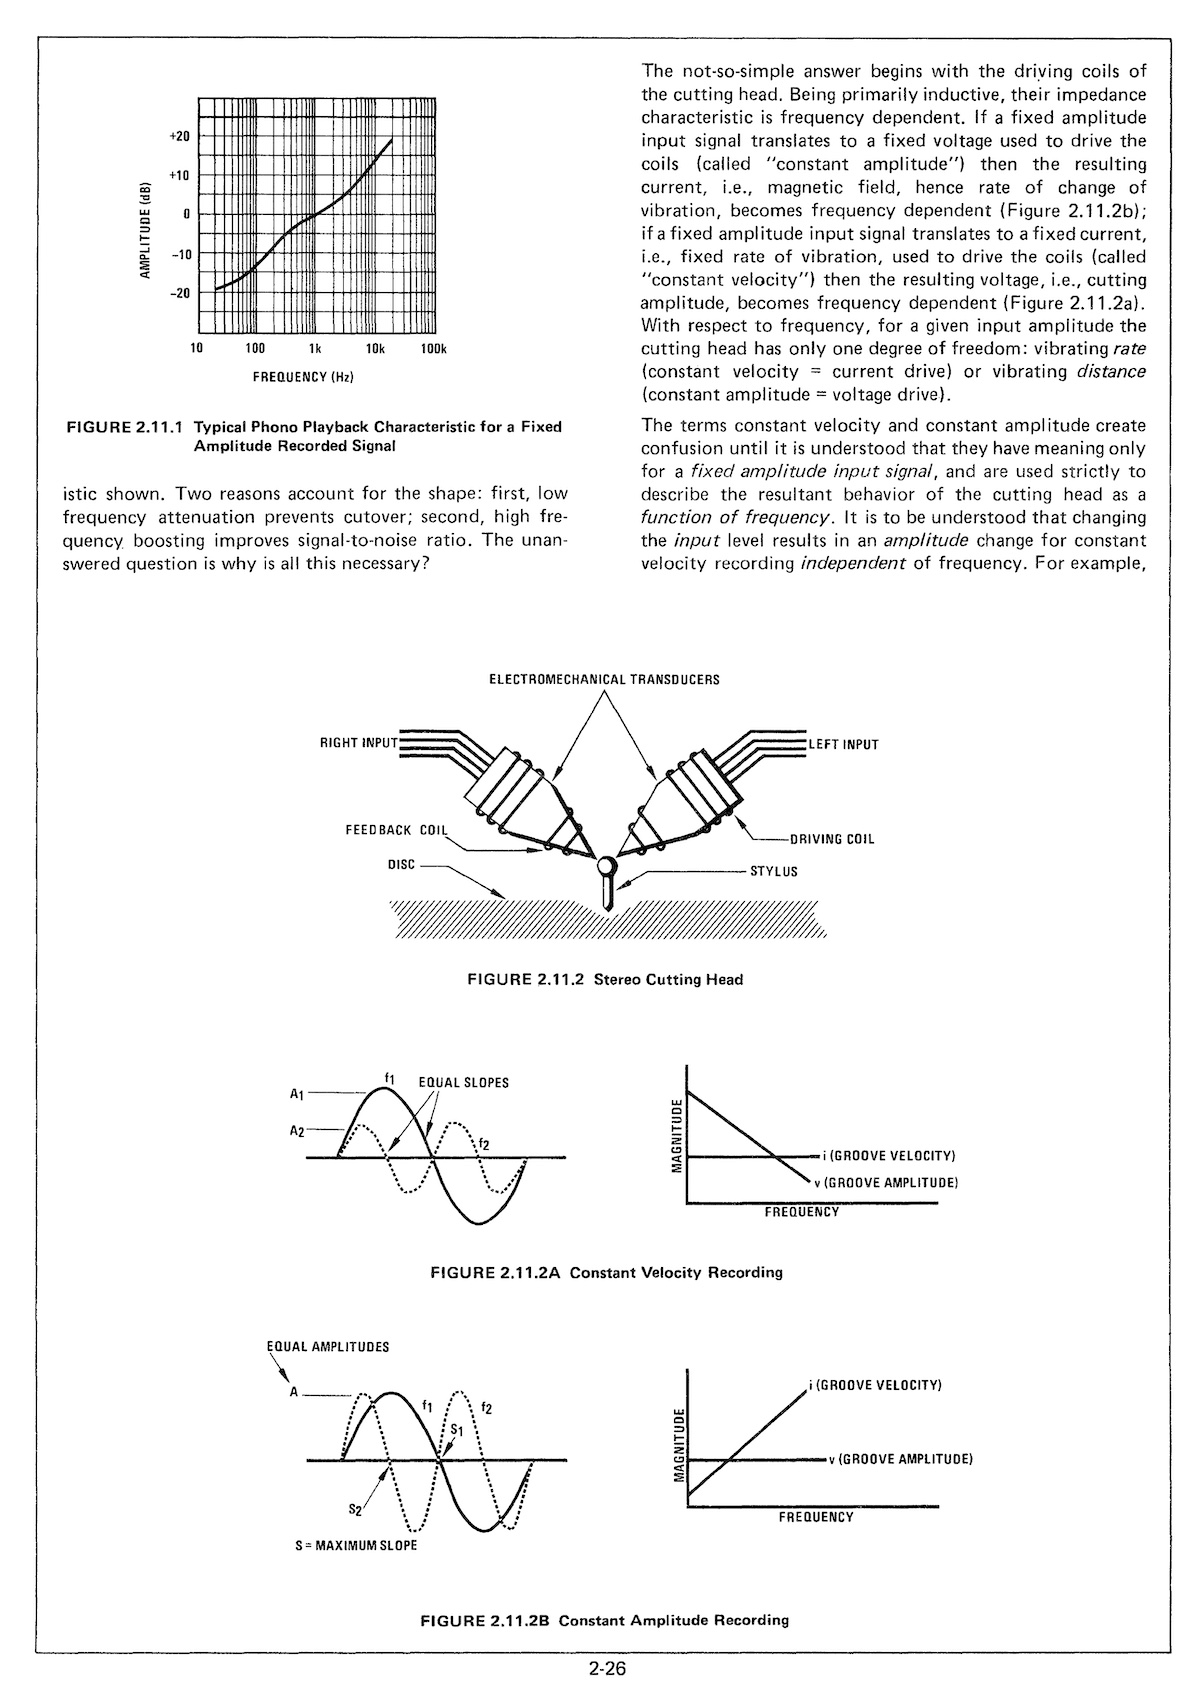 Constant Velocity and Constant Amplitude (National Semiconductor, 1976)